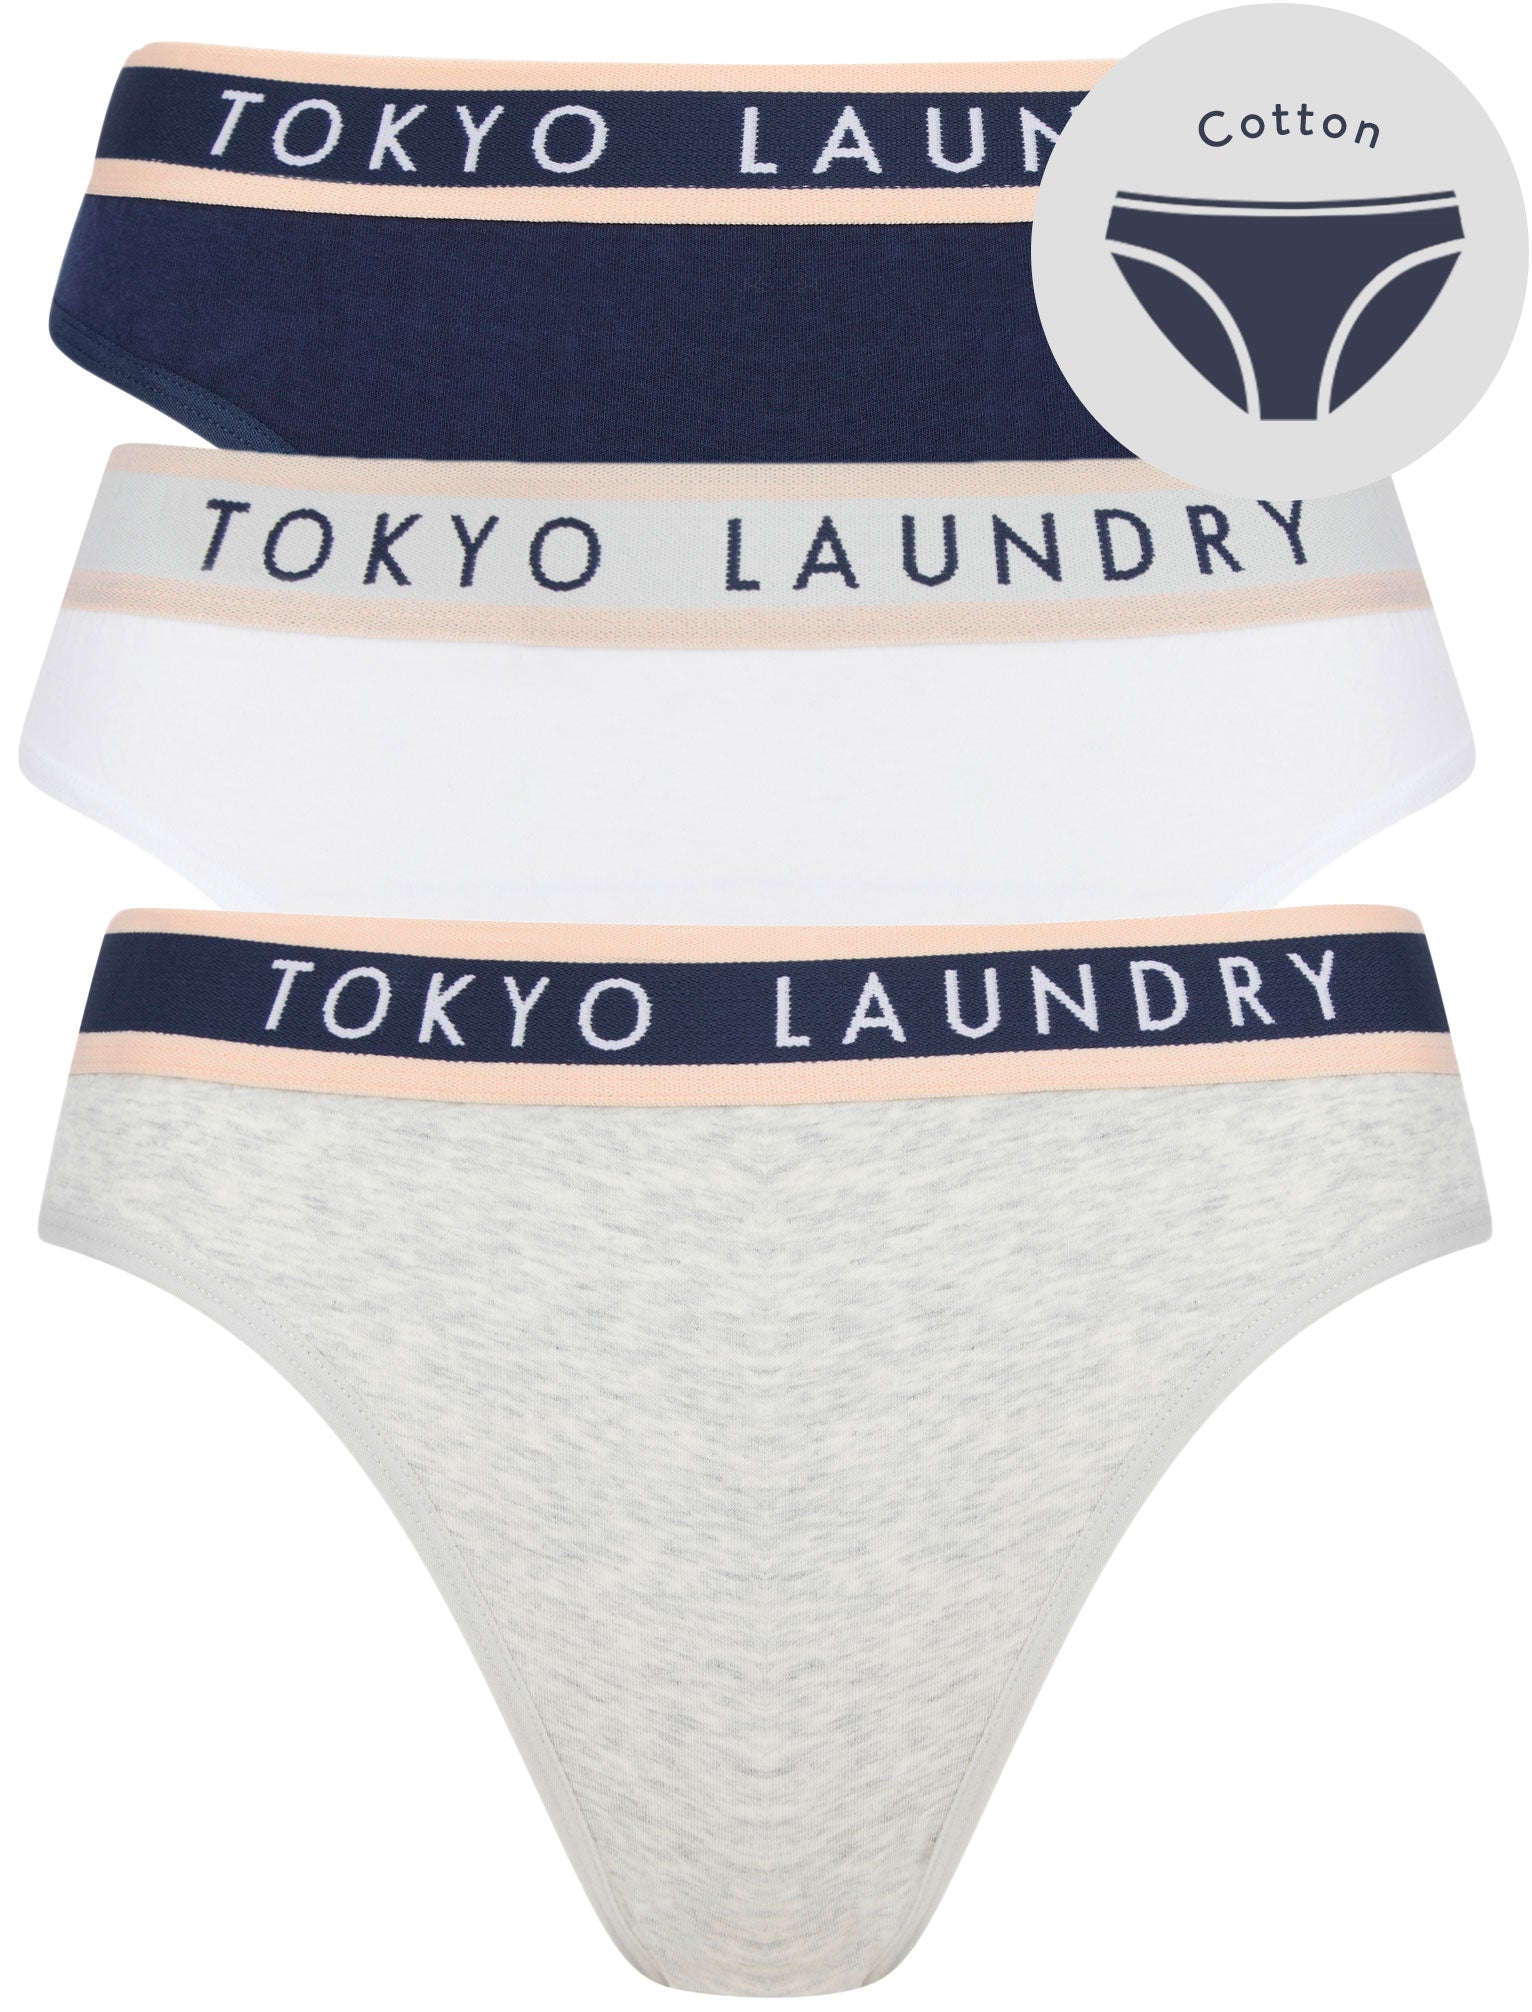 Womens Underwear Dolly (3 Pack) Cotton Assorted Briefs in Light Grey Marl / Bright White / Dress Blue - Tokyo Laundry / XS - Tokyo Laundry